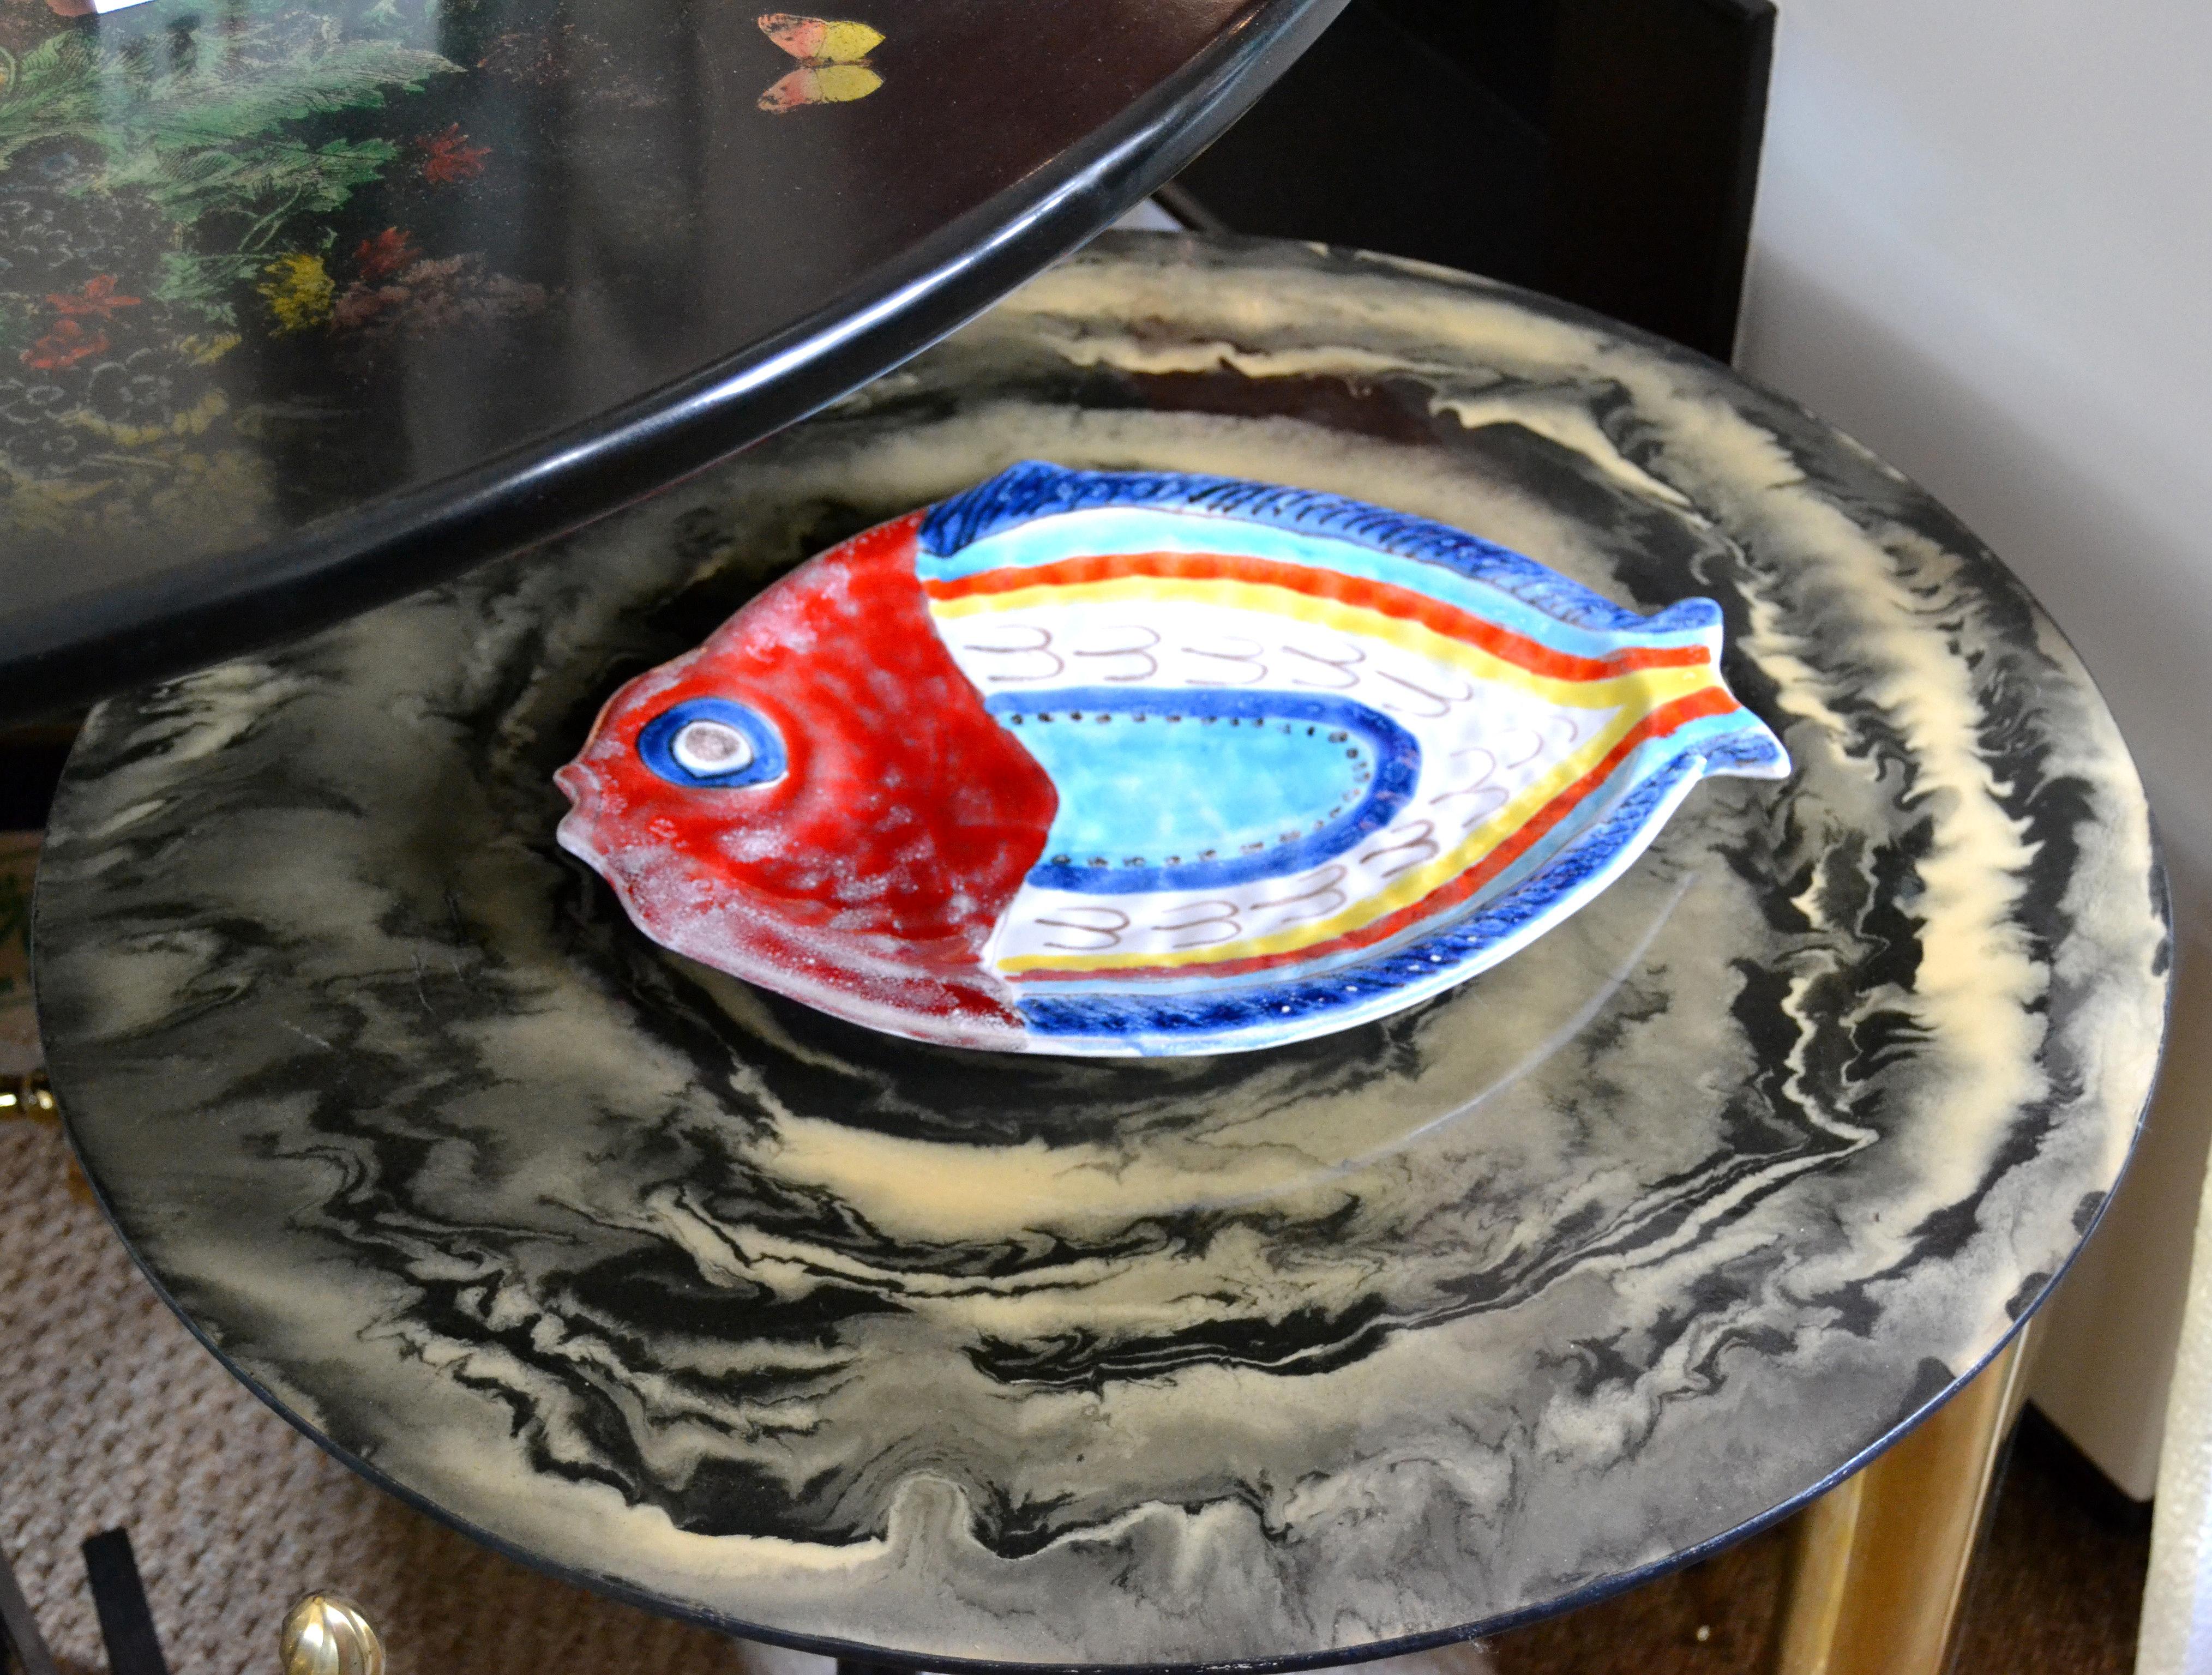 Original Italian Giovanni Desimone hand painted pottery, fish platter, serving plate.
The plate is glazed and very colorful.
Marked and numbered on underside, 'DeSimone, Italy 21'.